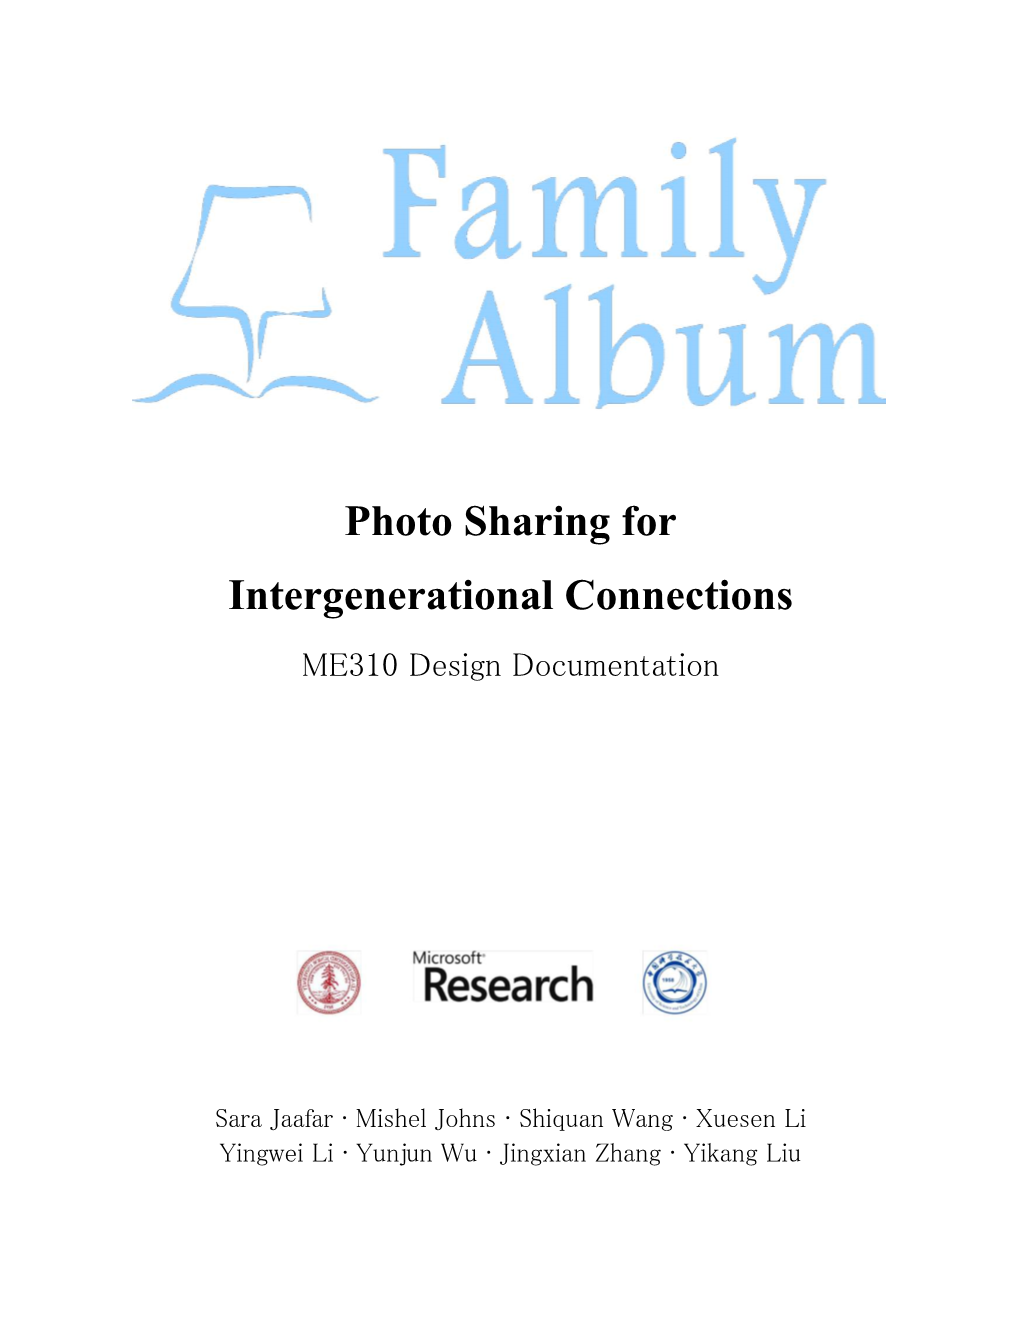 Photo Sharing for Intergenerational Connections